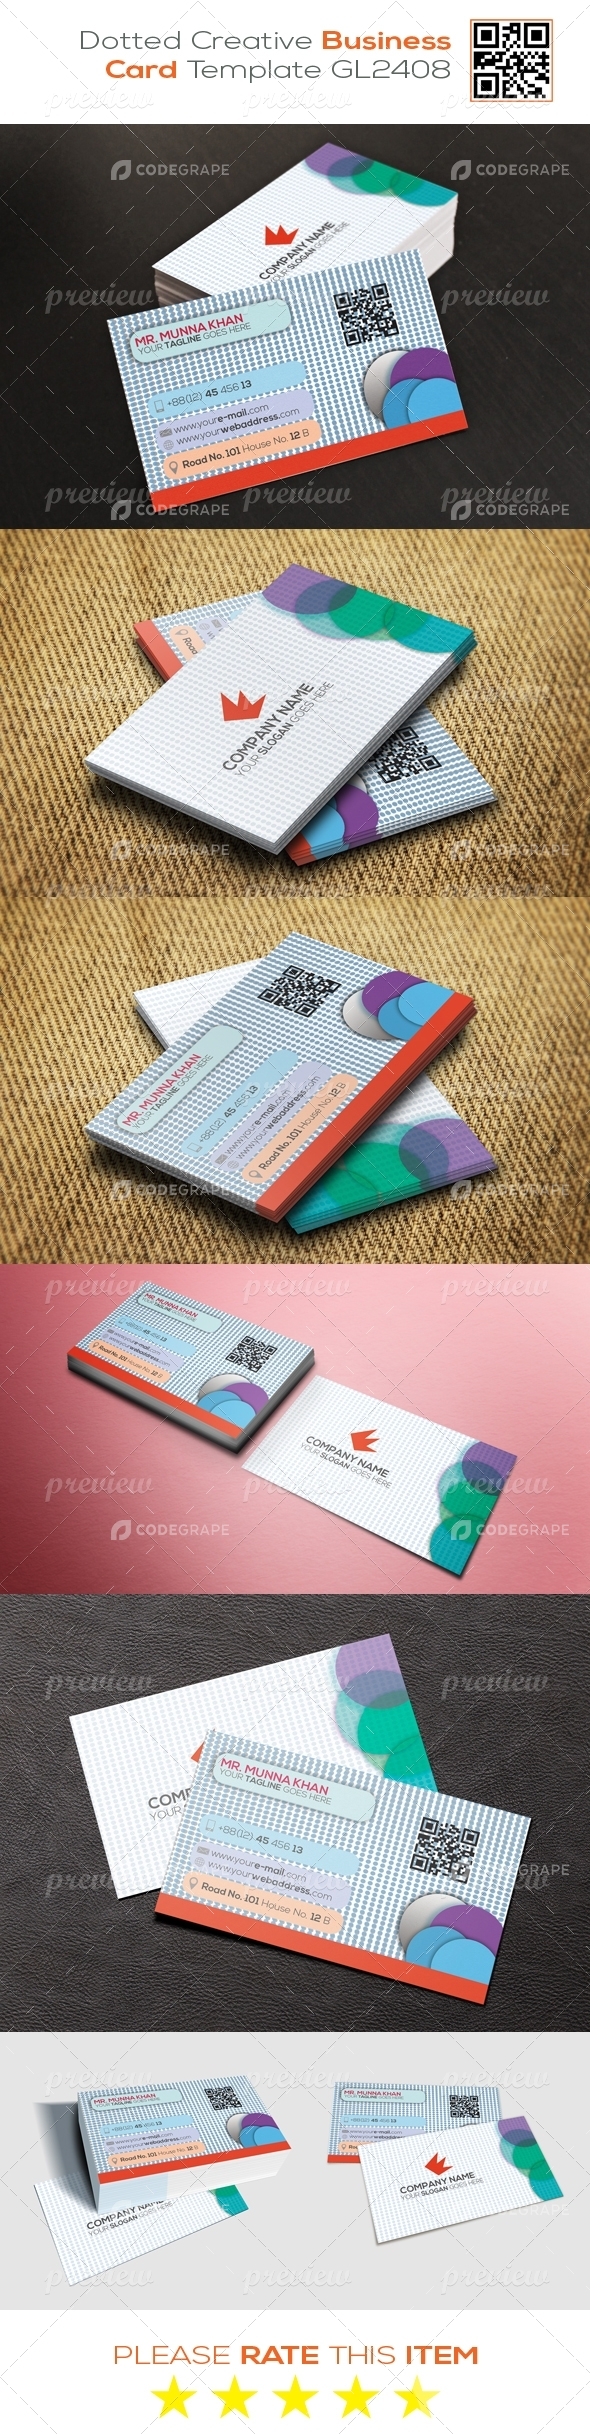 Dotted Creative Business Card Template GL2408